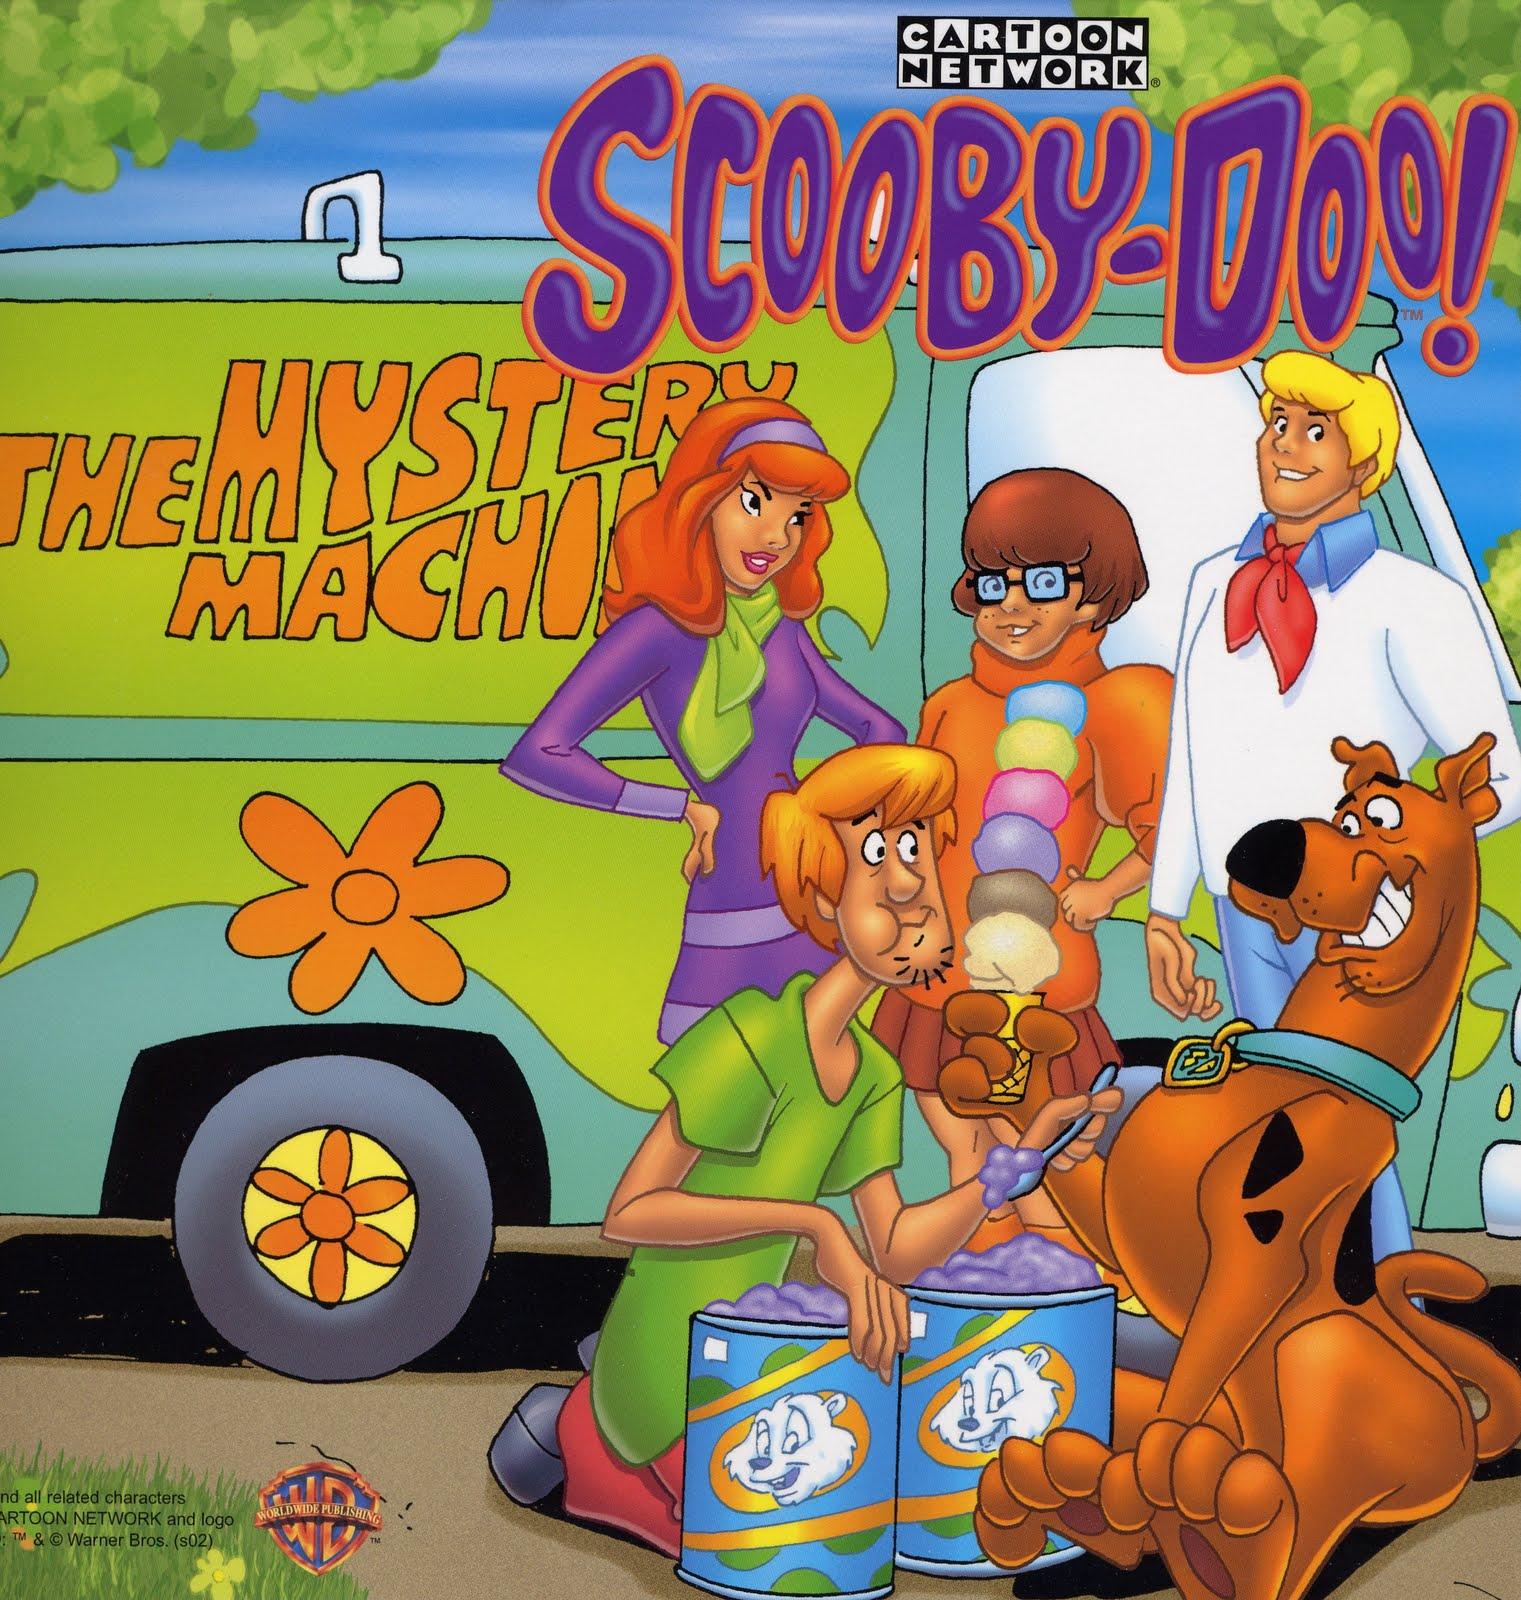 Scooby Doo the Mystery Hine Cartoon HD Wallpaper for Phone